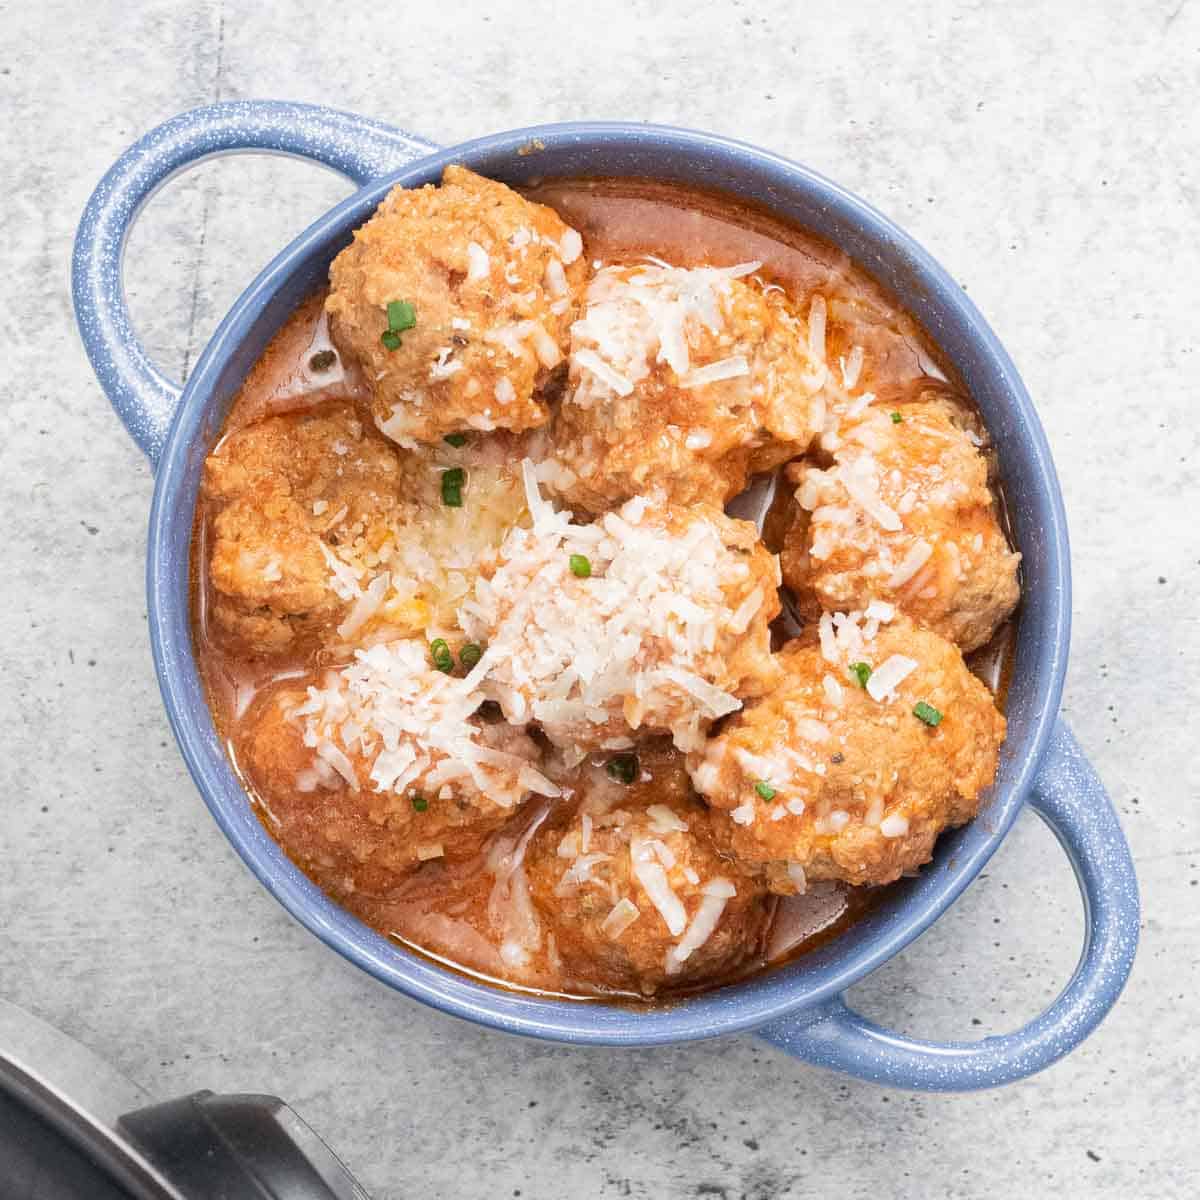 A bowl with meatballs in sauce garnished with parmesan cheese.